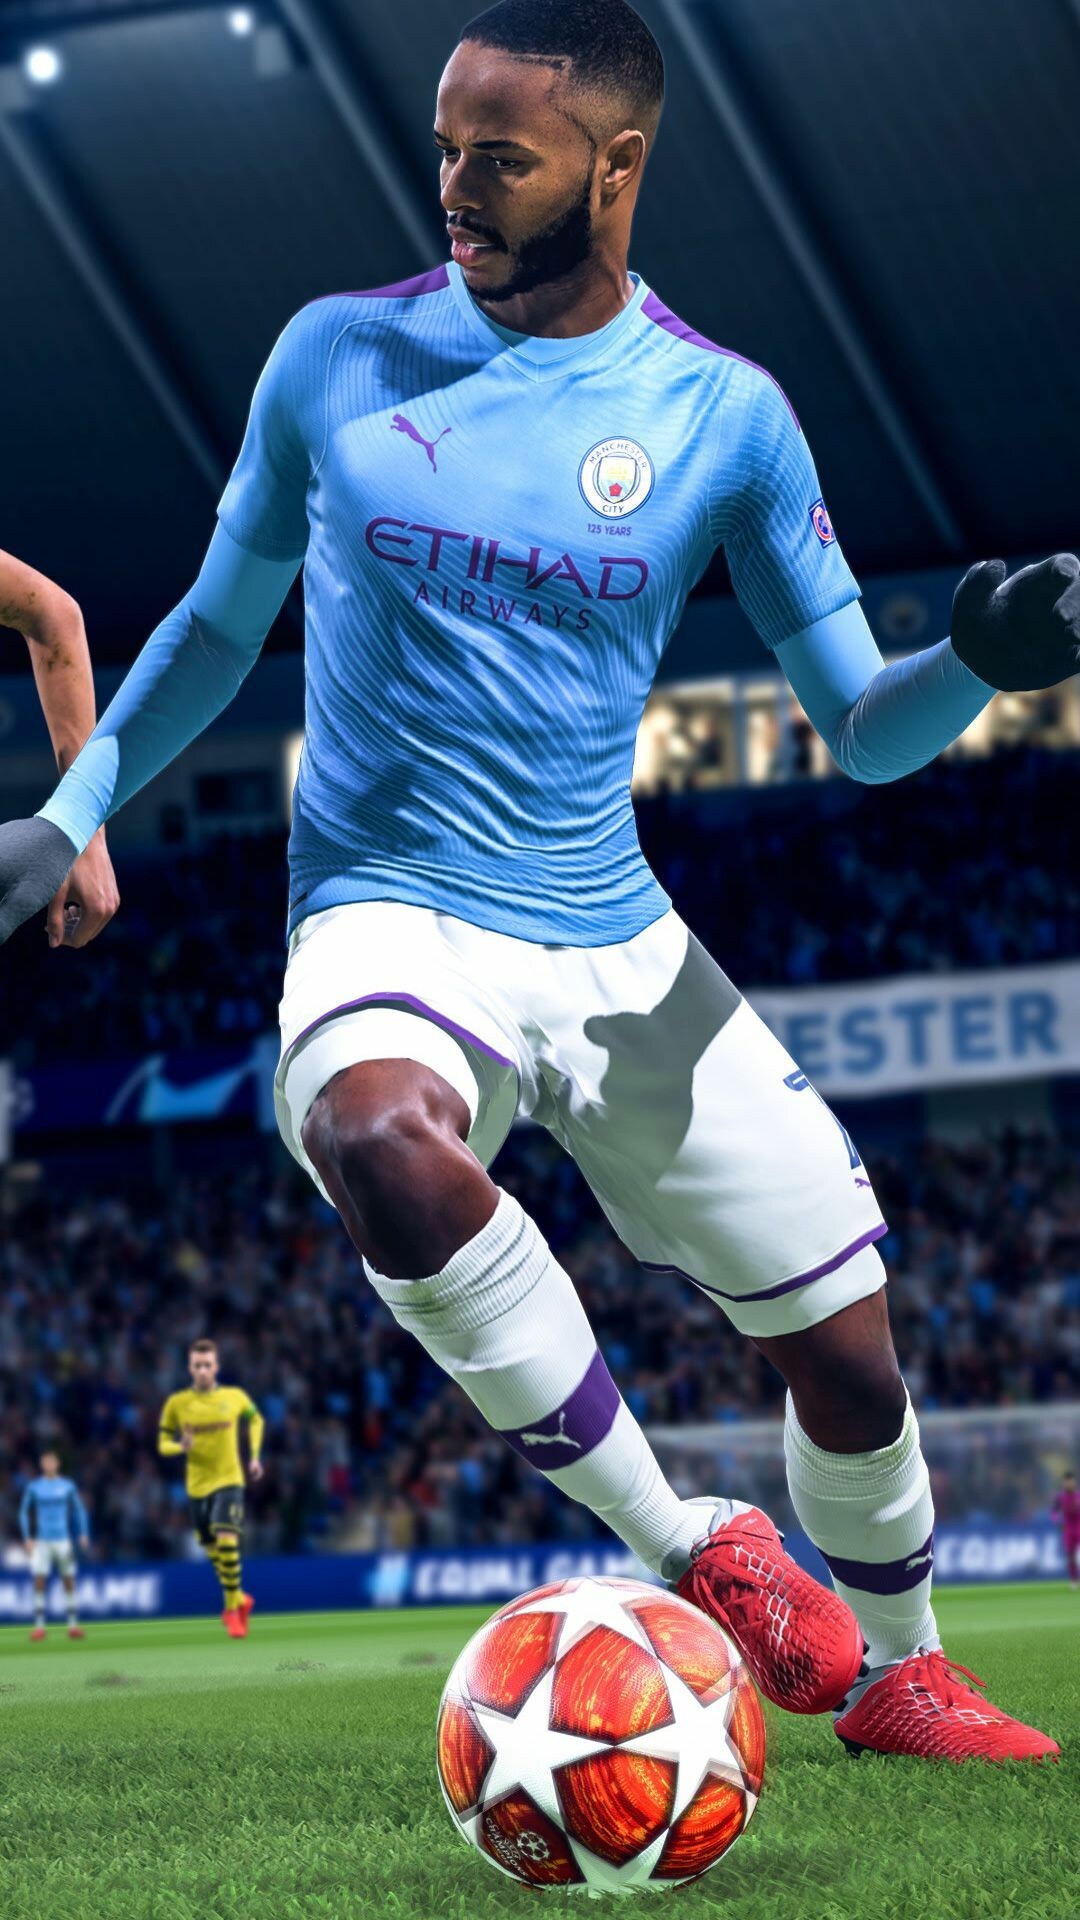 FIFA: Raheem Sterling, Playing for Chelsea in the England Premier League. 1080x1920 Full HD Background.